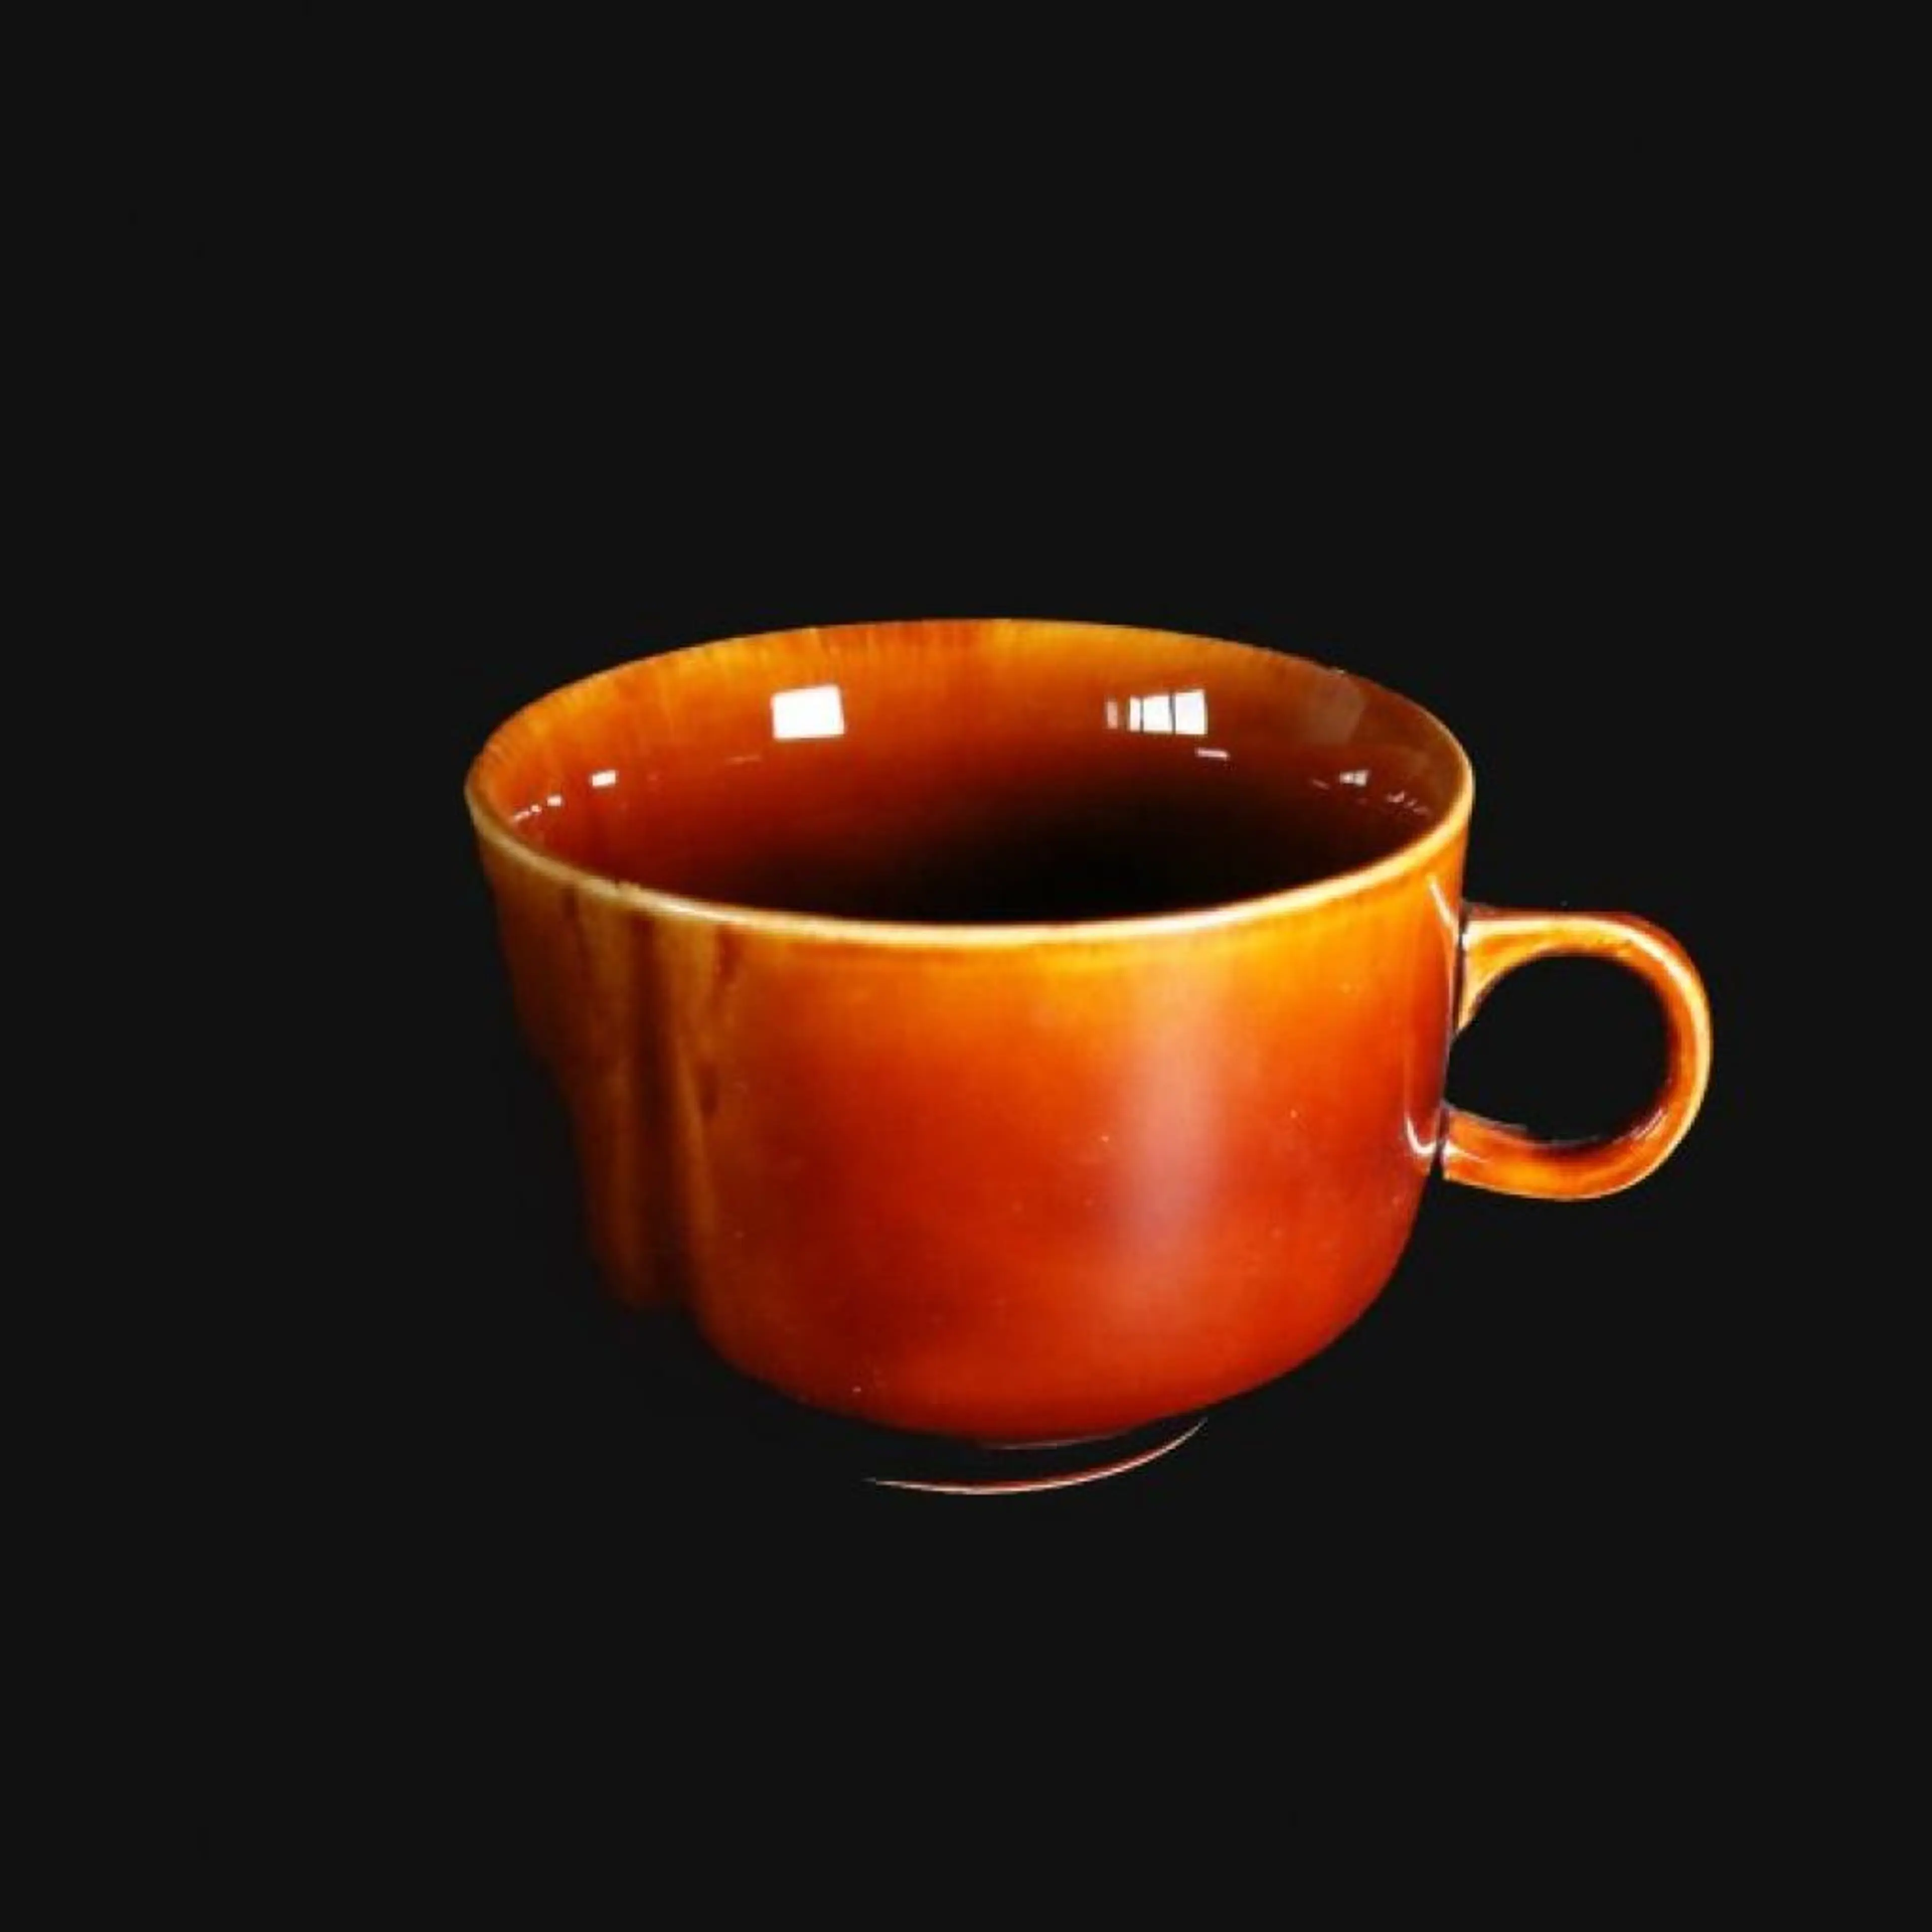 A Classic Vintage Brown Coffee Cup